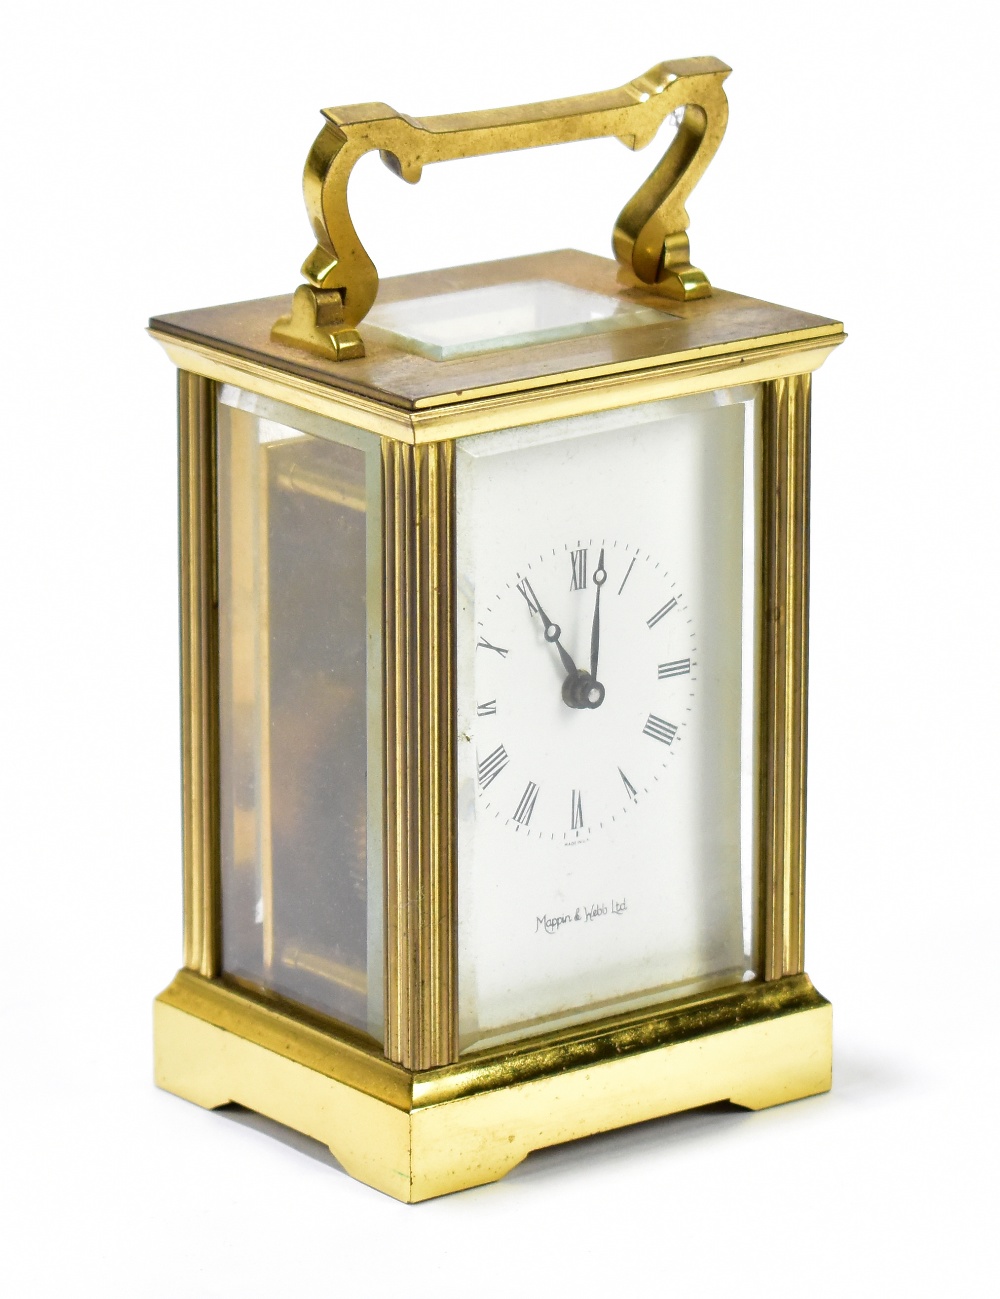 MAPPIN & WEBB; a brass cased carriage clock, the enamel dial set with Roman numerals, height